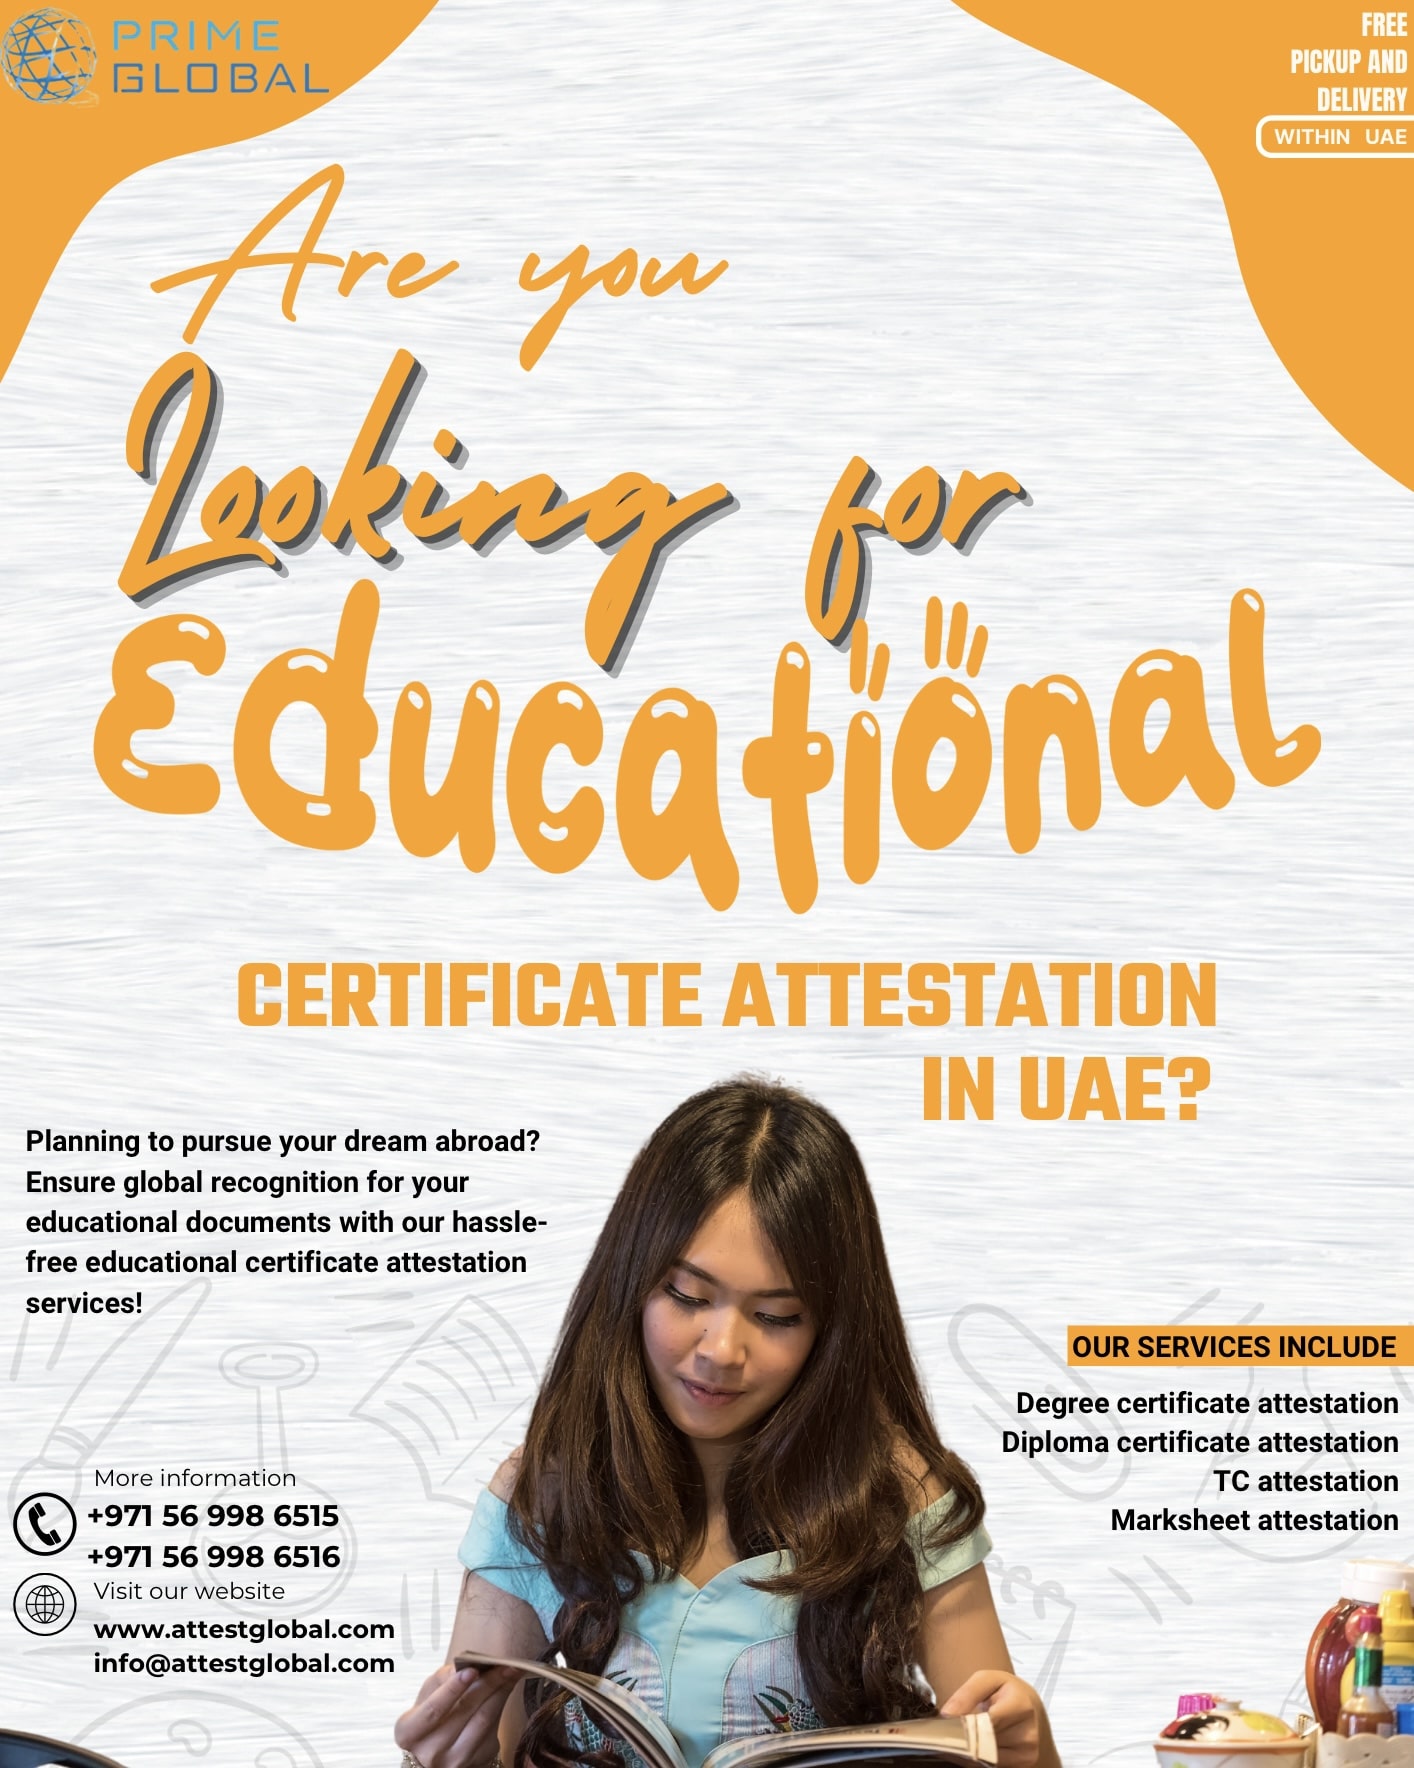  Ensuring Document Authenticity: Attestation Services in UAE